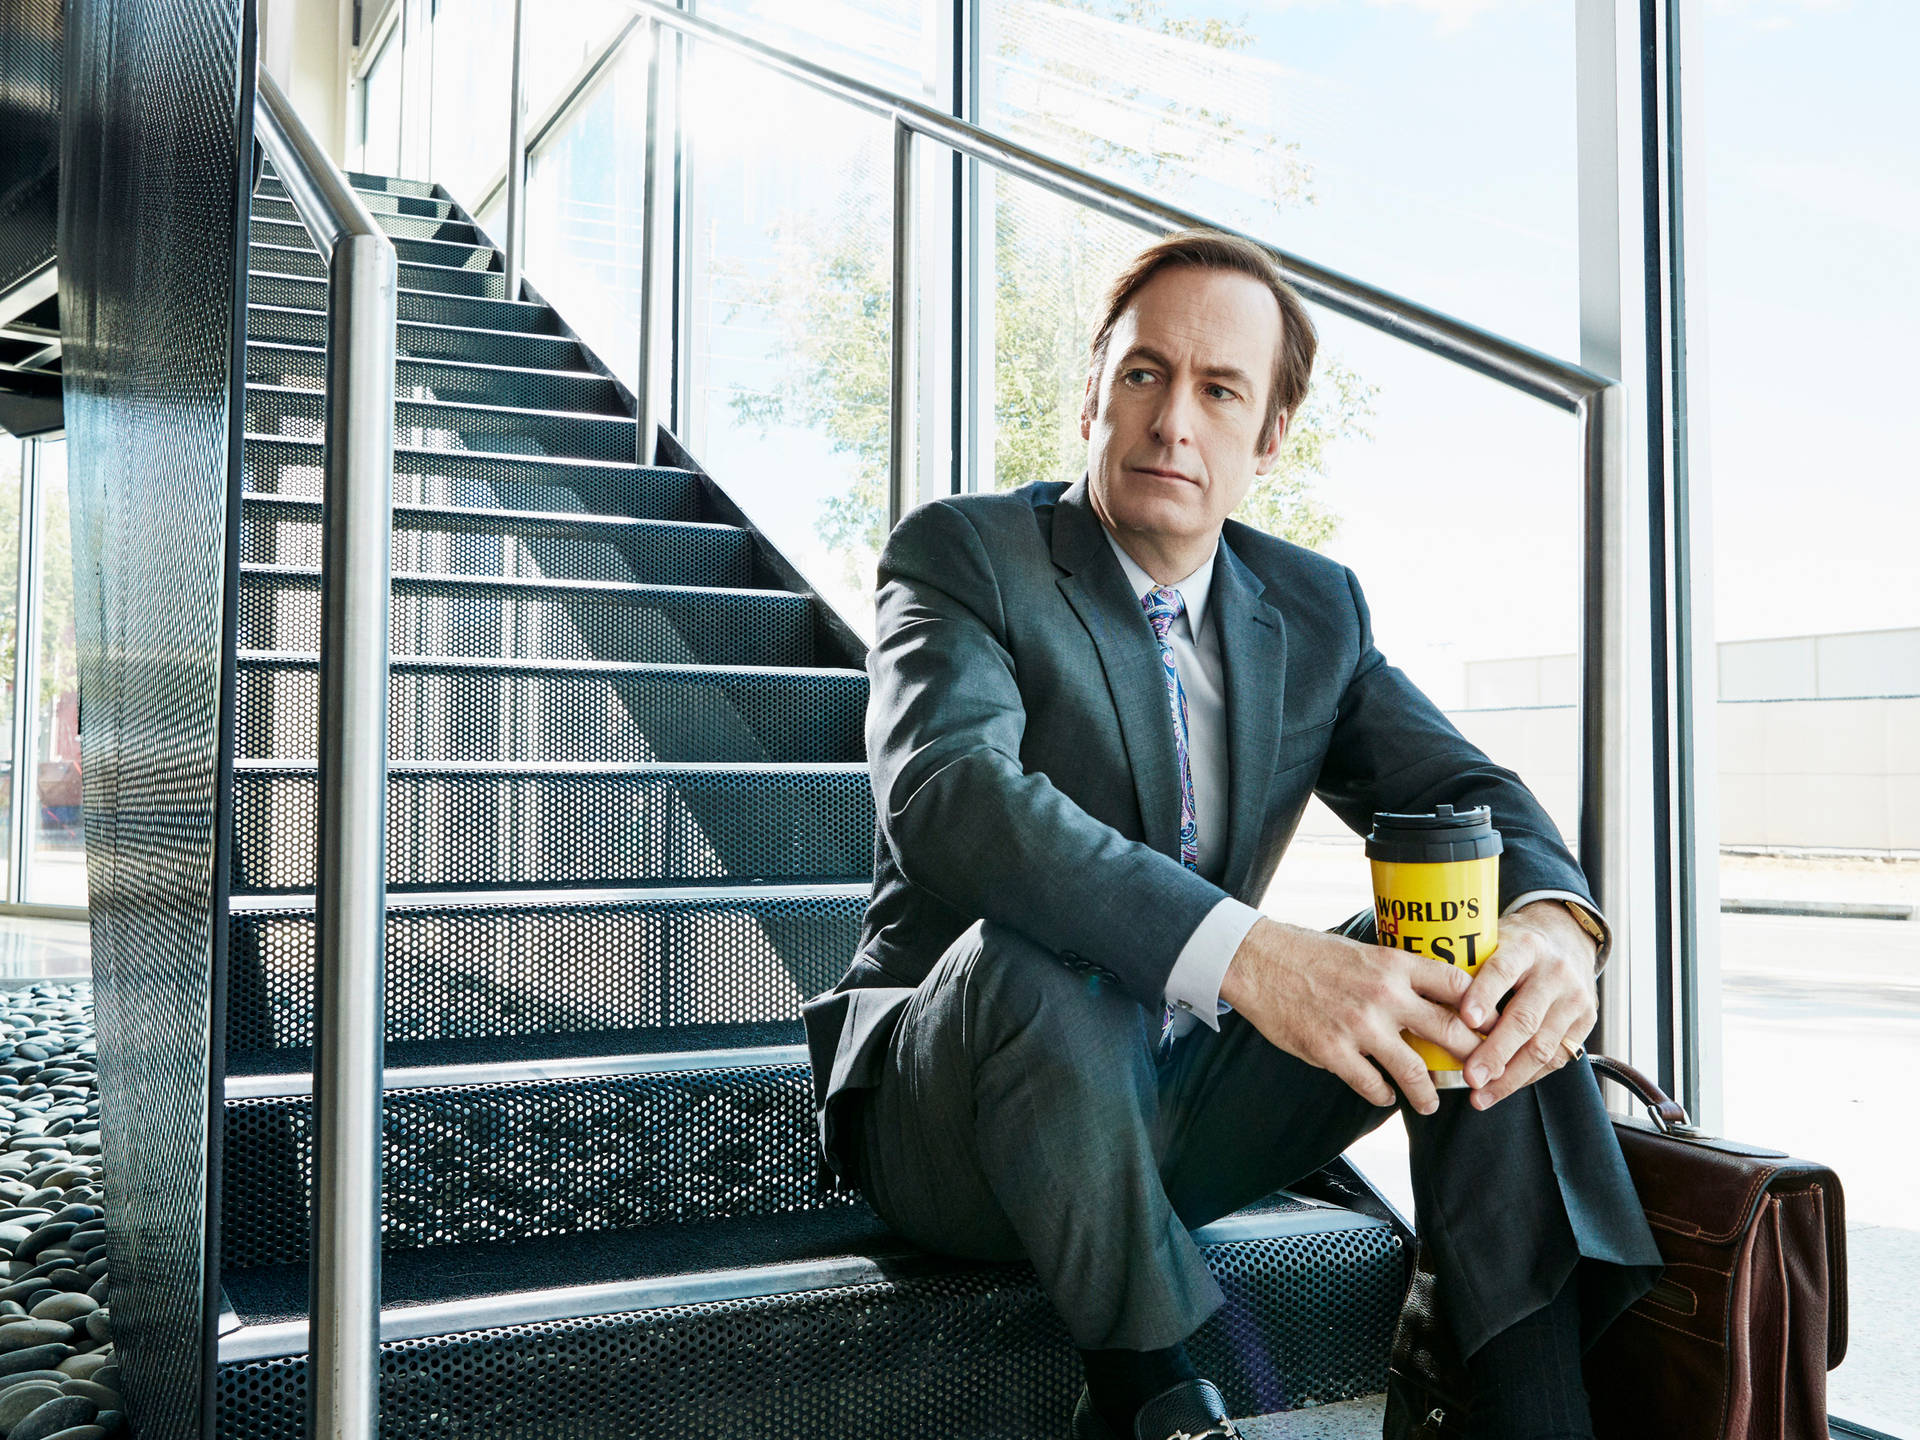 Jimmy McGill Descending A Staircase in Better Call Saul Wallpaper